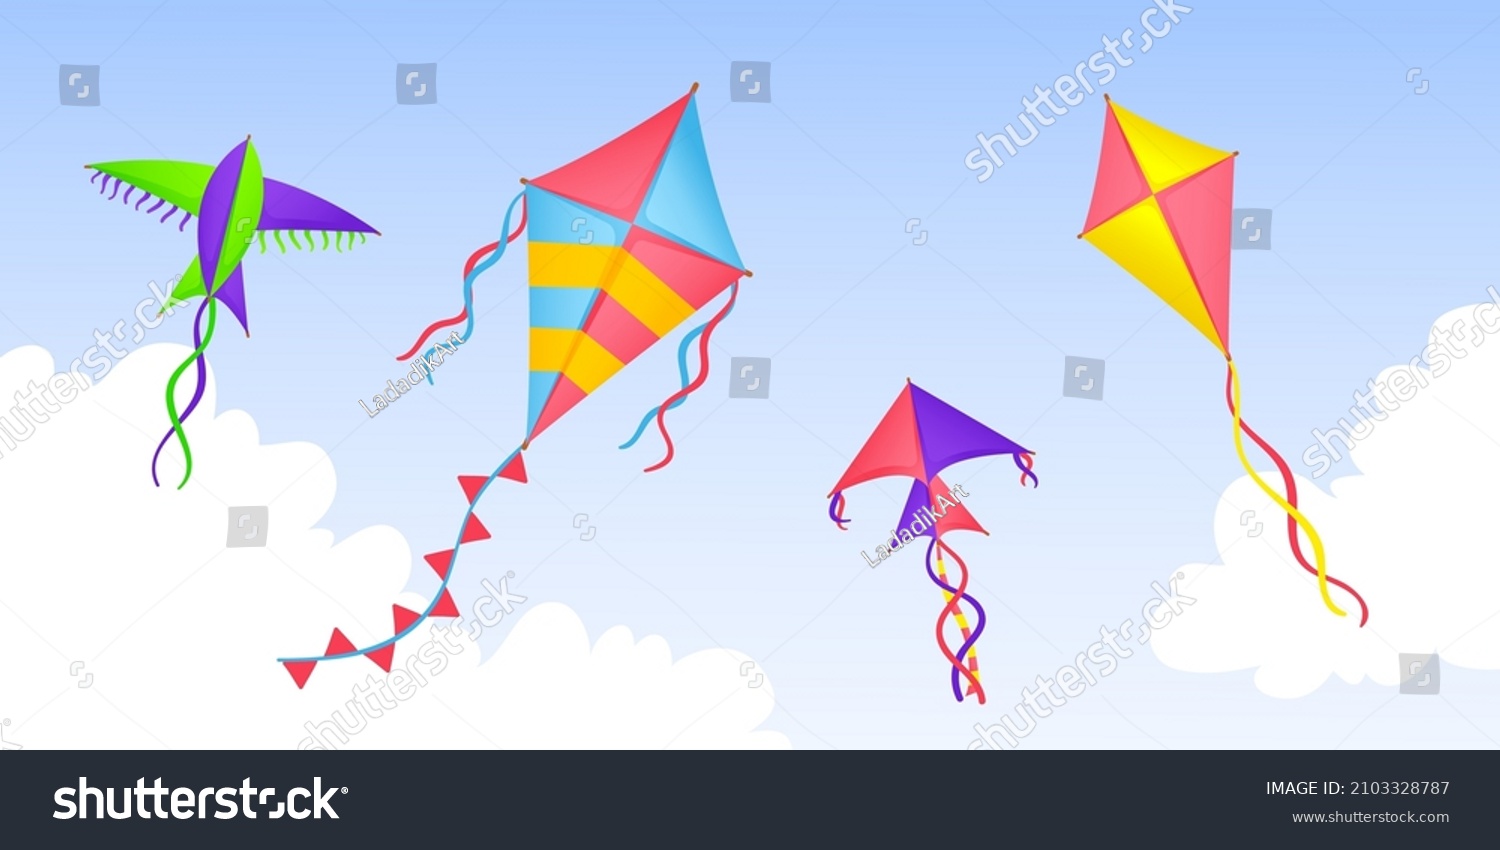 SVG of Kite in sky. Cartoon kites flying in clouds, happy festival banner. Summer outdoor play, kids colorful toys fly in wind. Seasonal neat vector background svg